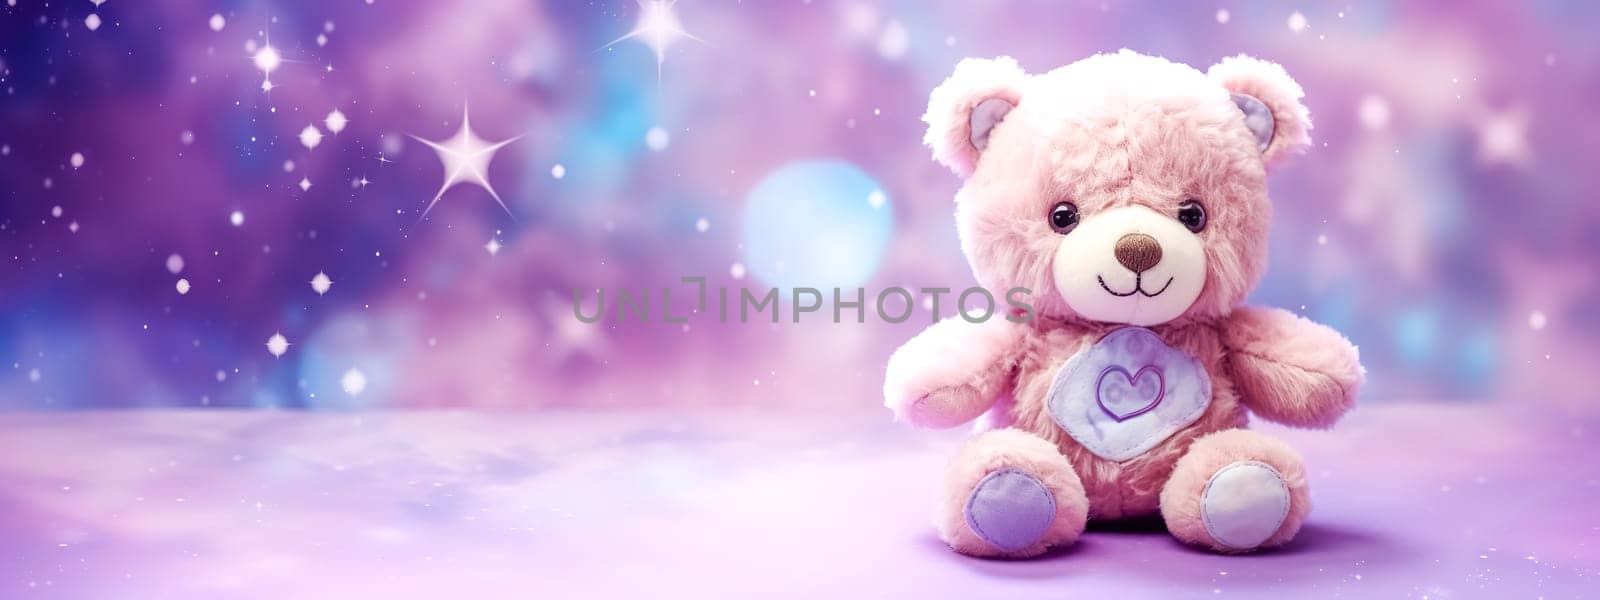 plush teddy bear with a heart on its chest, set against a whimsical, starry background, conveying warmth and comfort